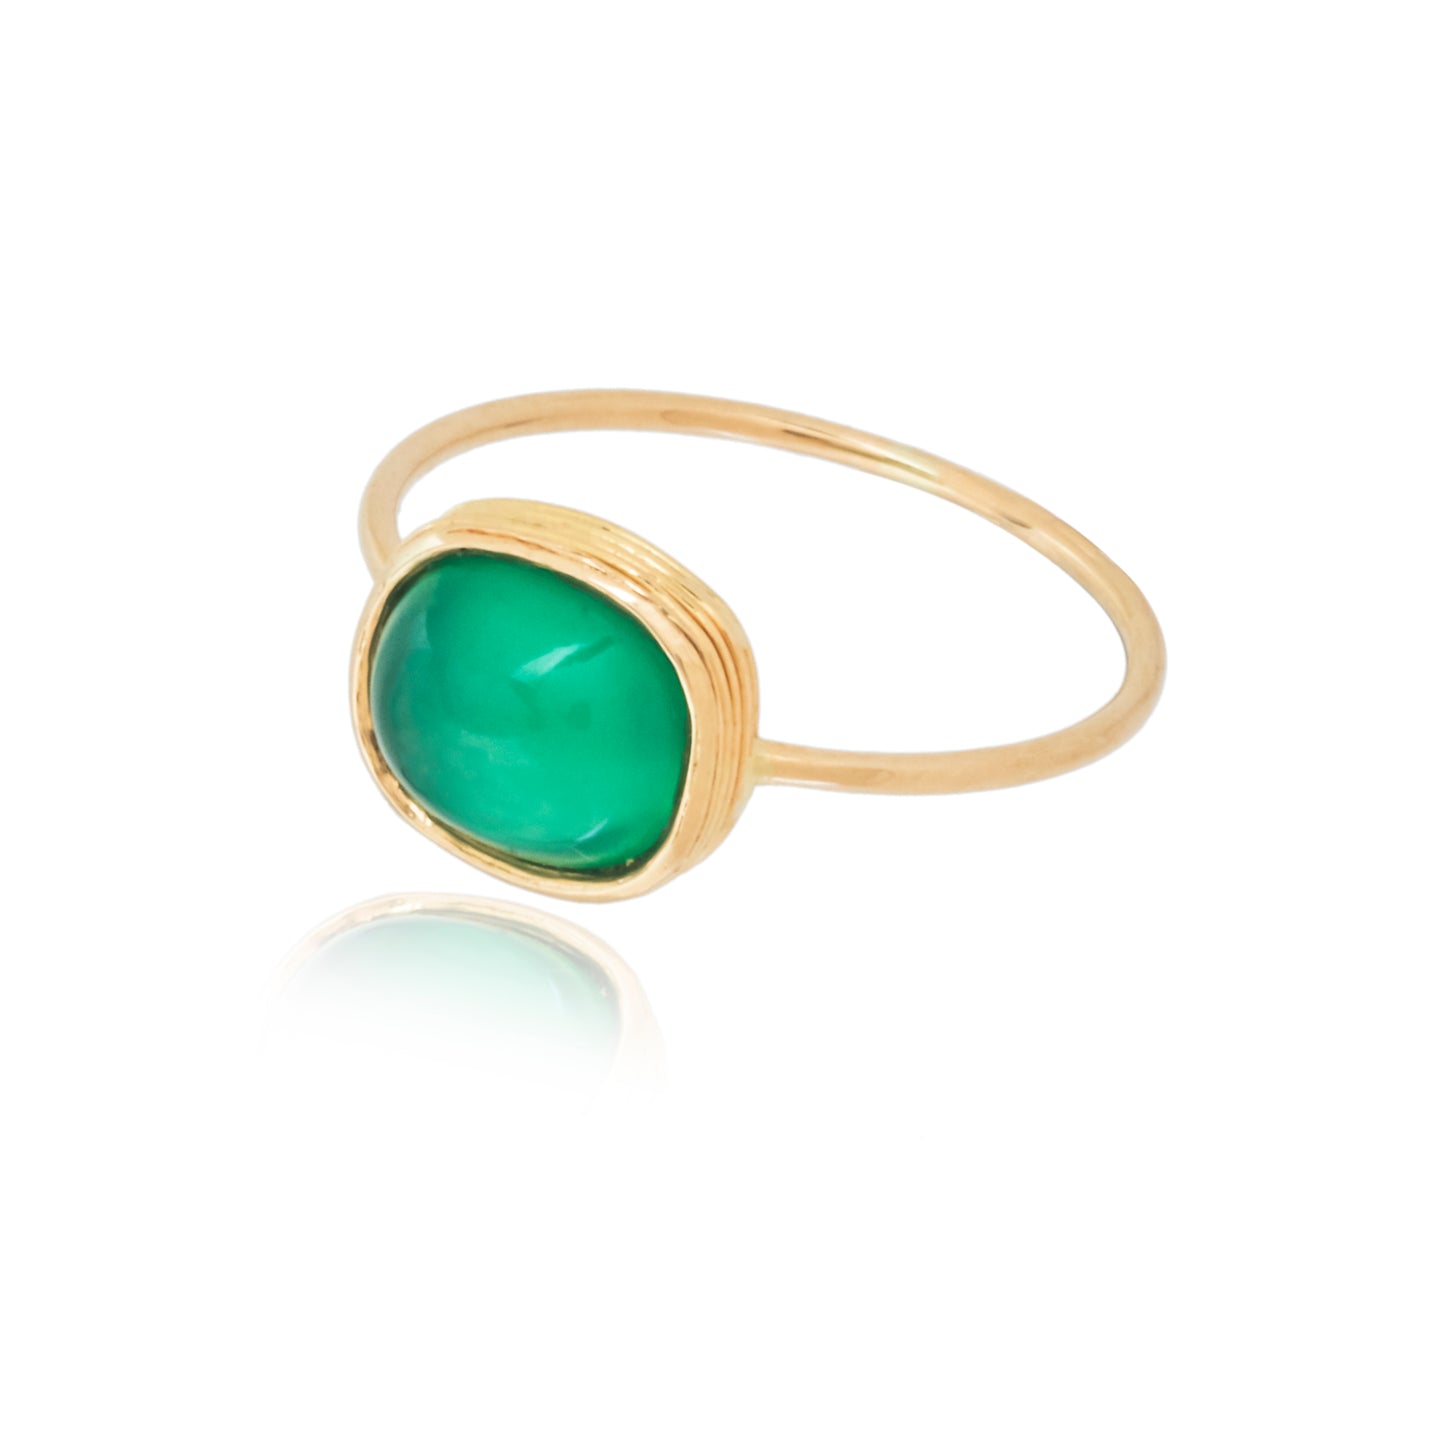 GOLD AND GREEN ONYX RING